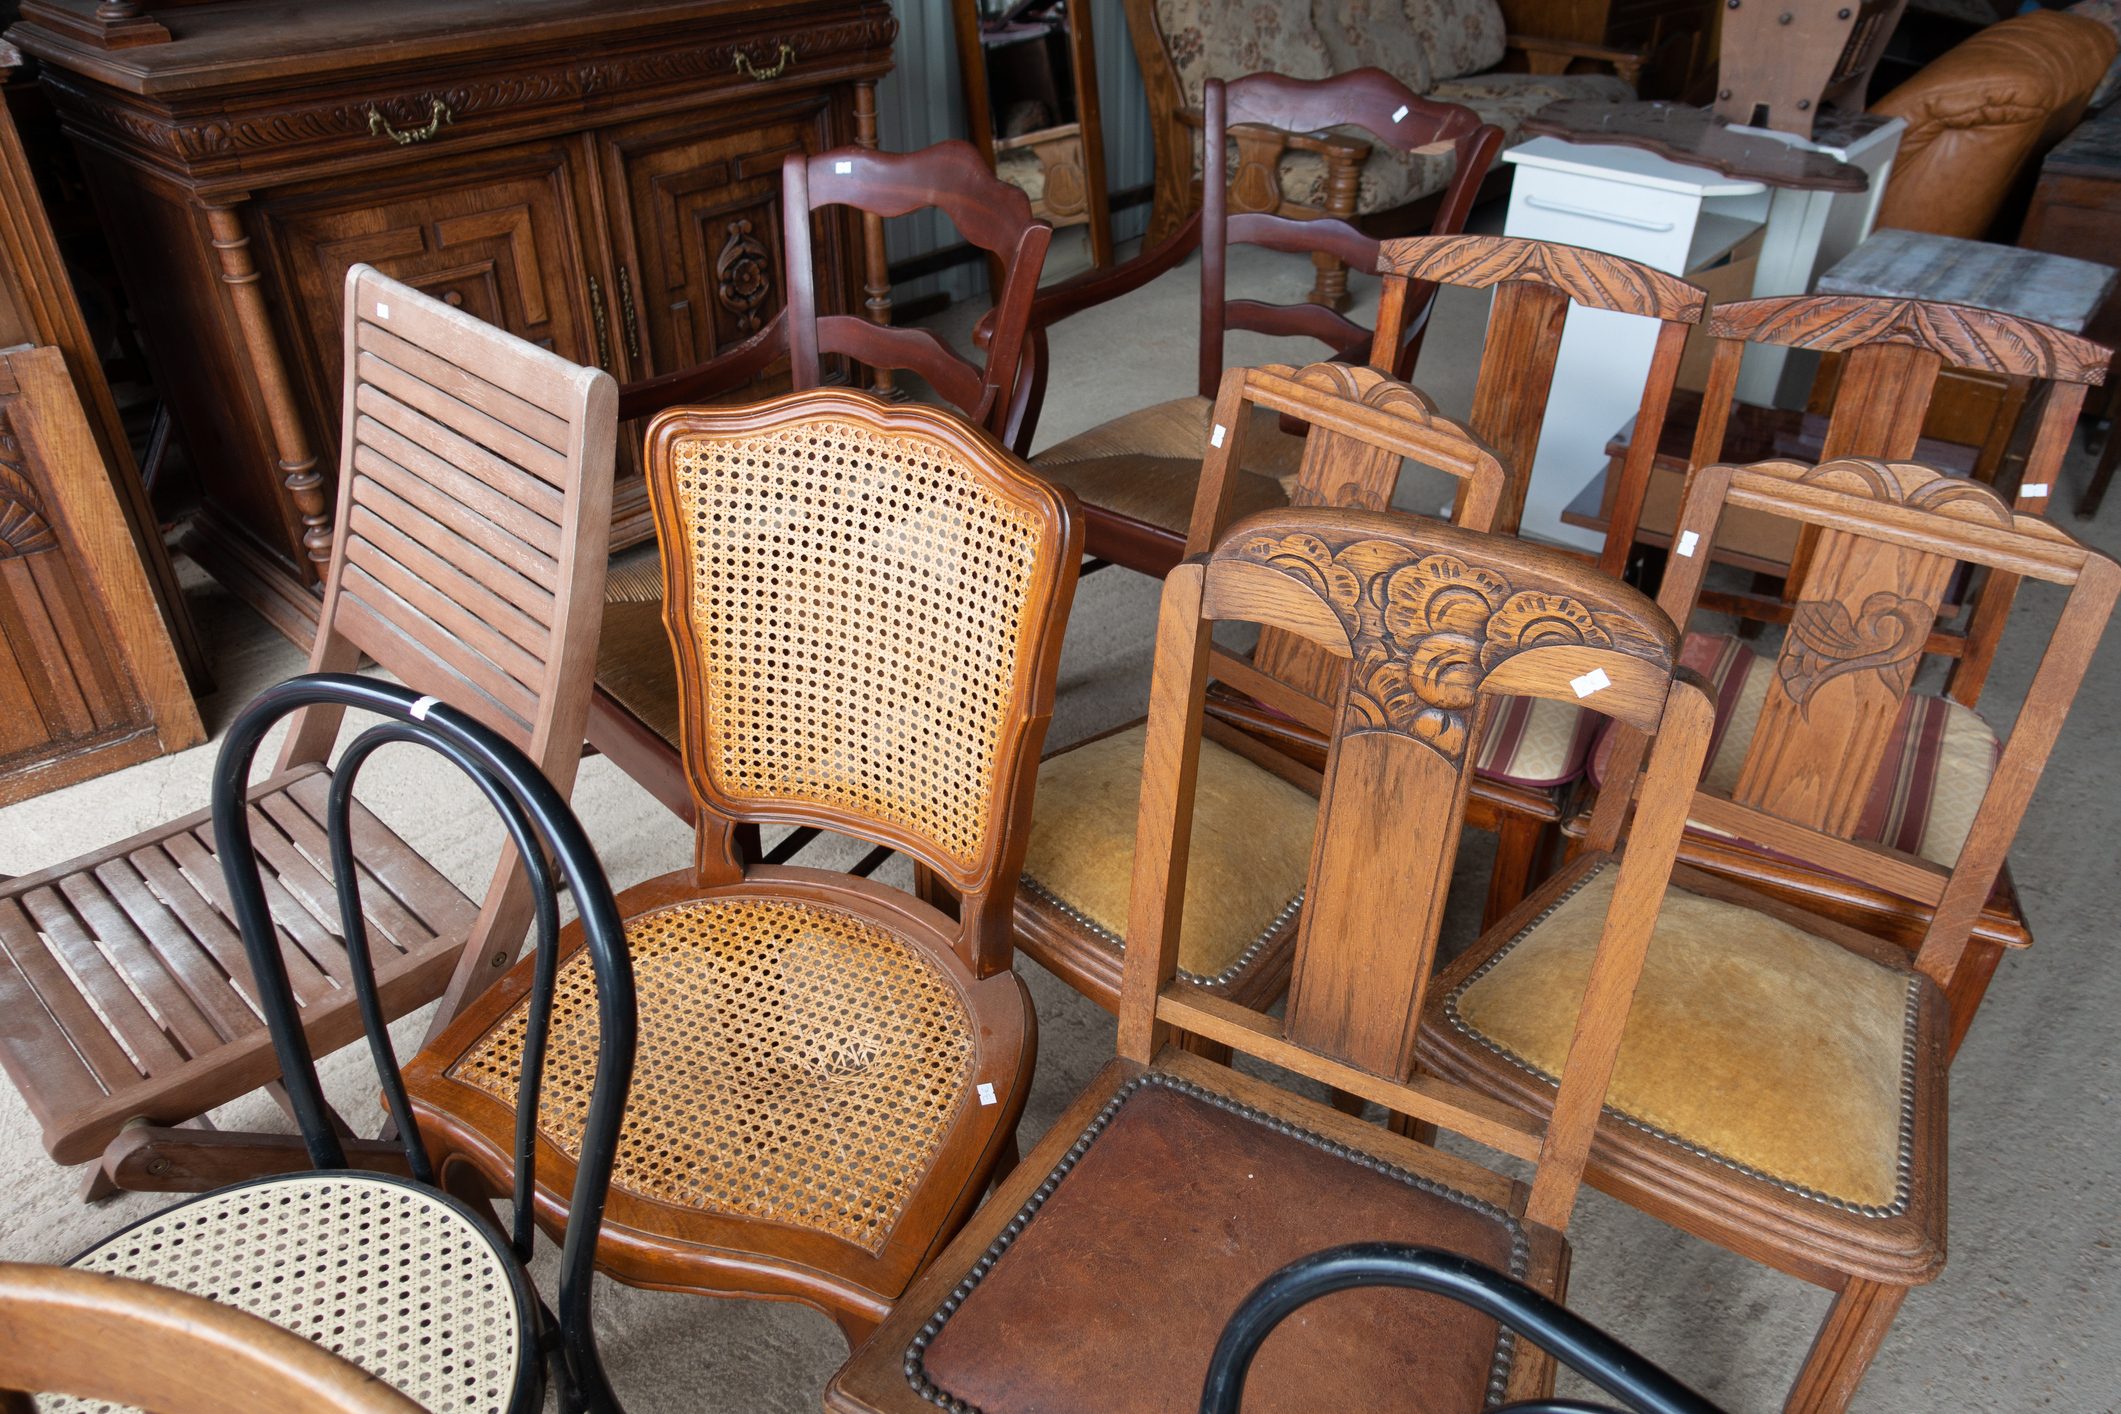 Guide to Selling Antique Furniture